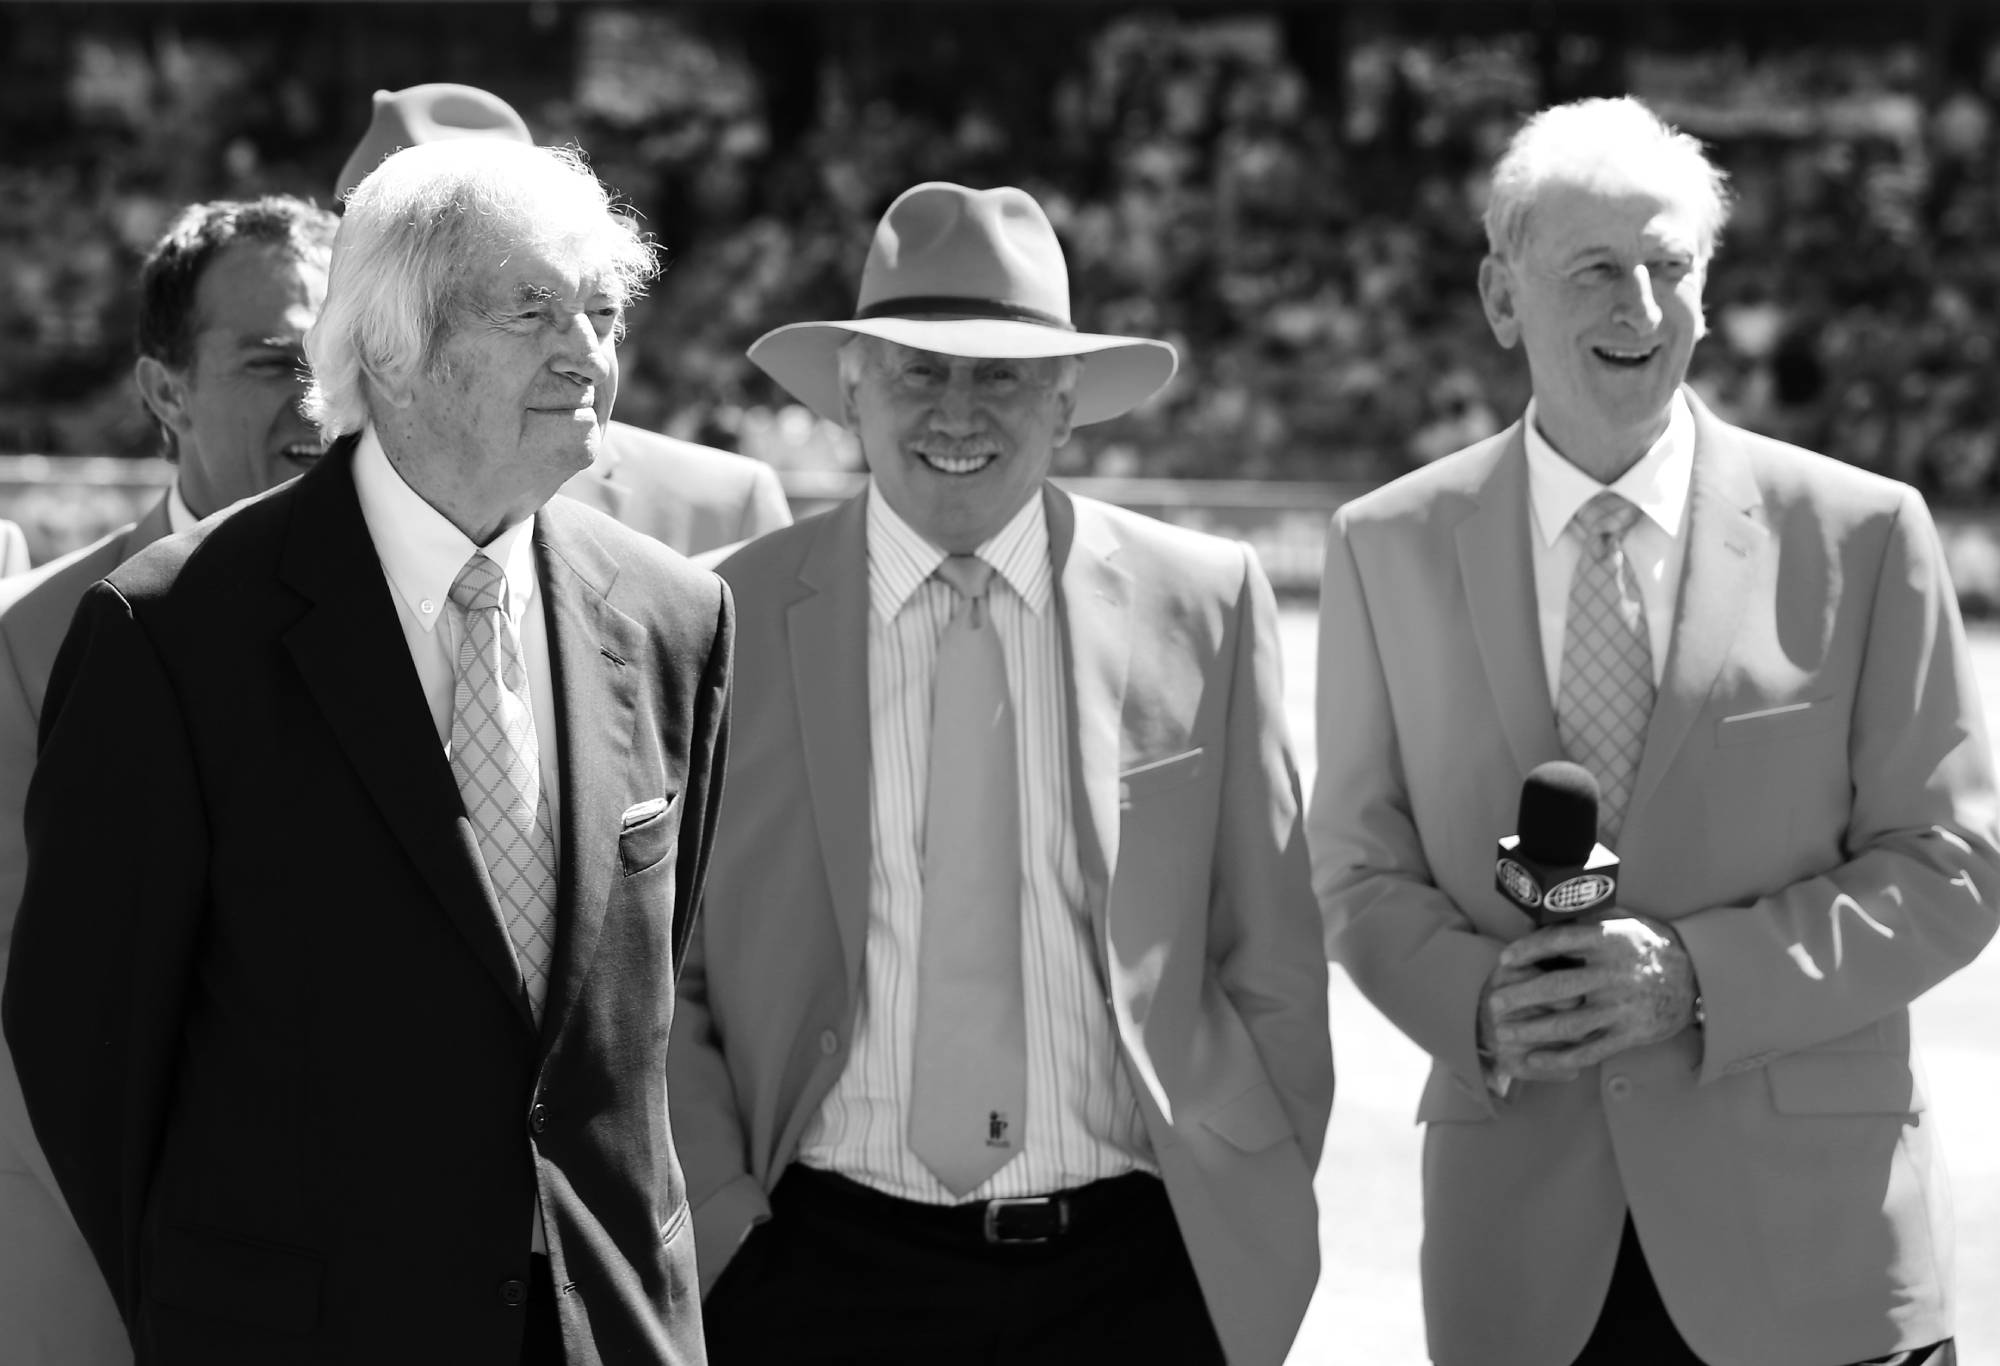 SYDNEY, AUSTRALIA - JANUARY 05:  (EDITORS NOTE: Image has been converted to black and white.) Former Australian test players and current Channel 9 commentators Ian Healy, Richie Benaud, Michael Slater, Ian Chappell and Bill Lawry watch on during a McGrath Foundation piece at the tea break during day three of the Third Test match between Australia and Sri Lanka at Sydney Cricket Ground on January 5, 2013 in Sydney, Australia.  (Photo by Mark Kolbe/Getty Images)